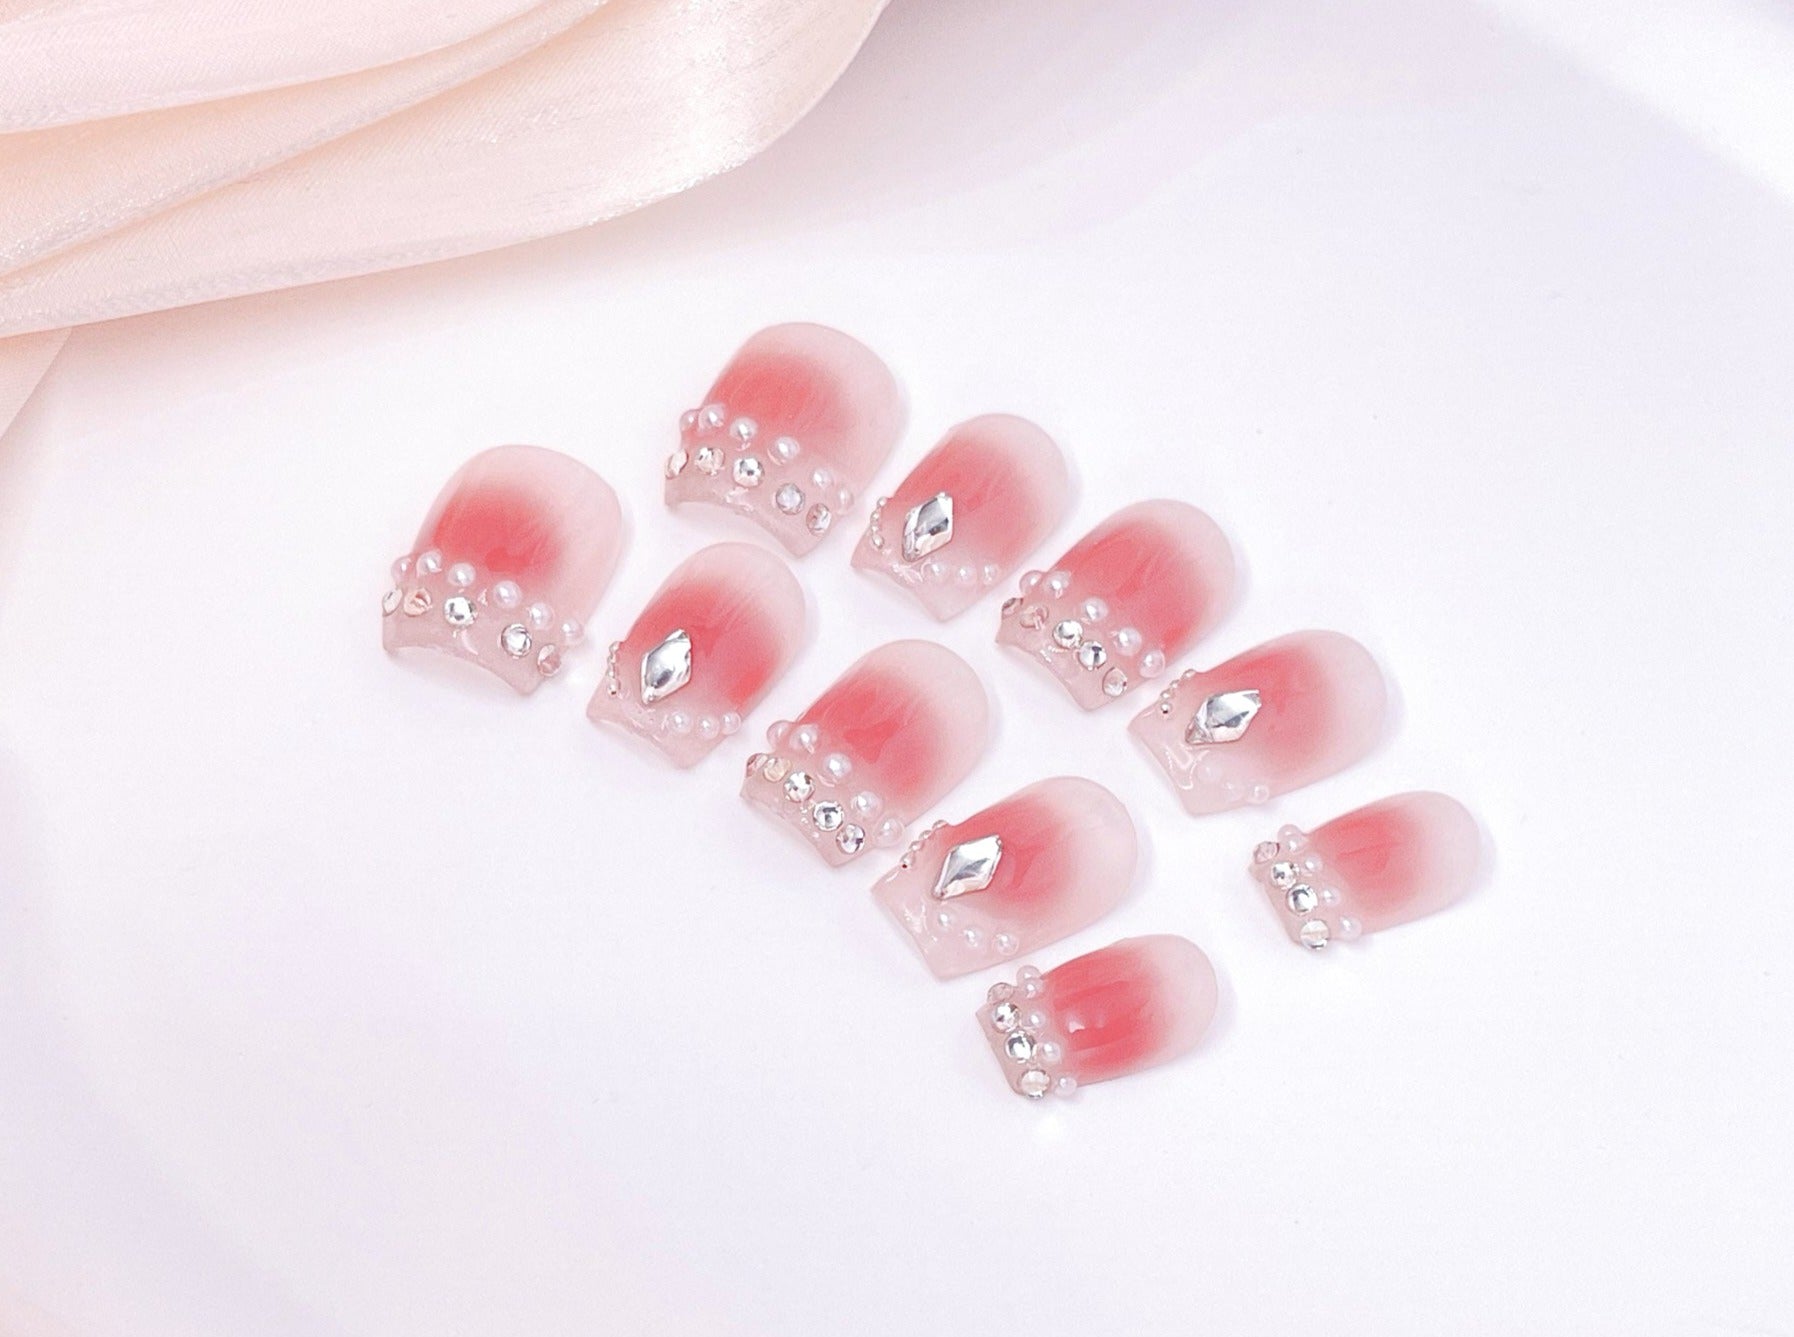 Handmade Short Coffin Pink Ombre Press on Nails | Snaptips